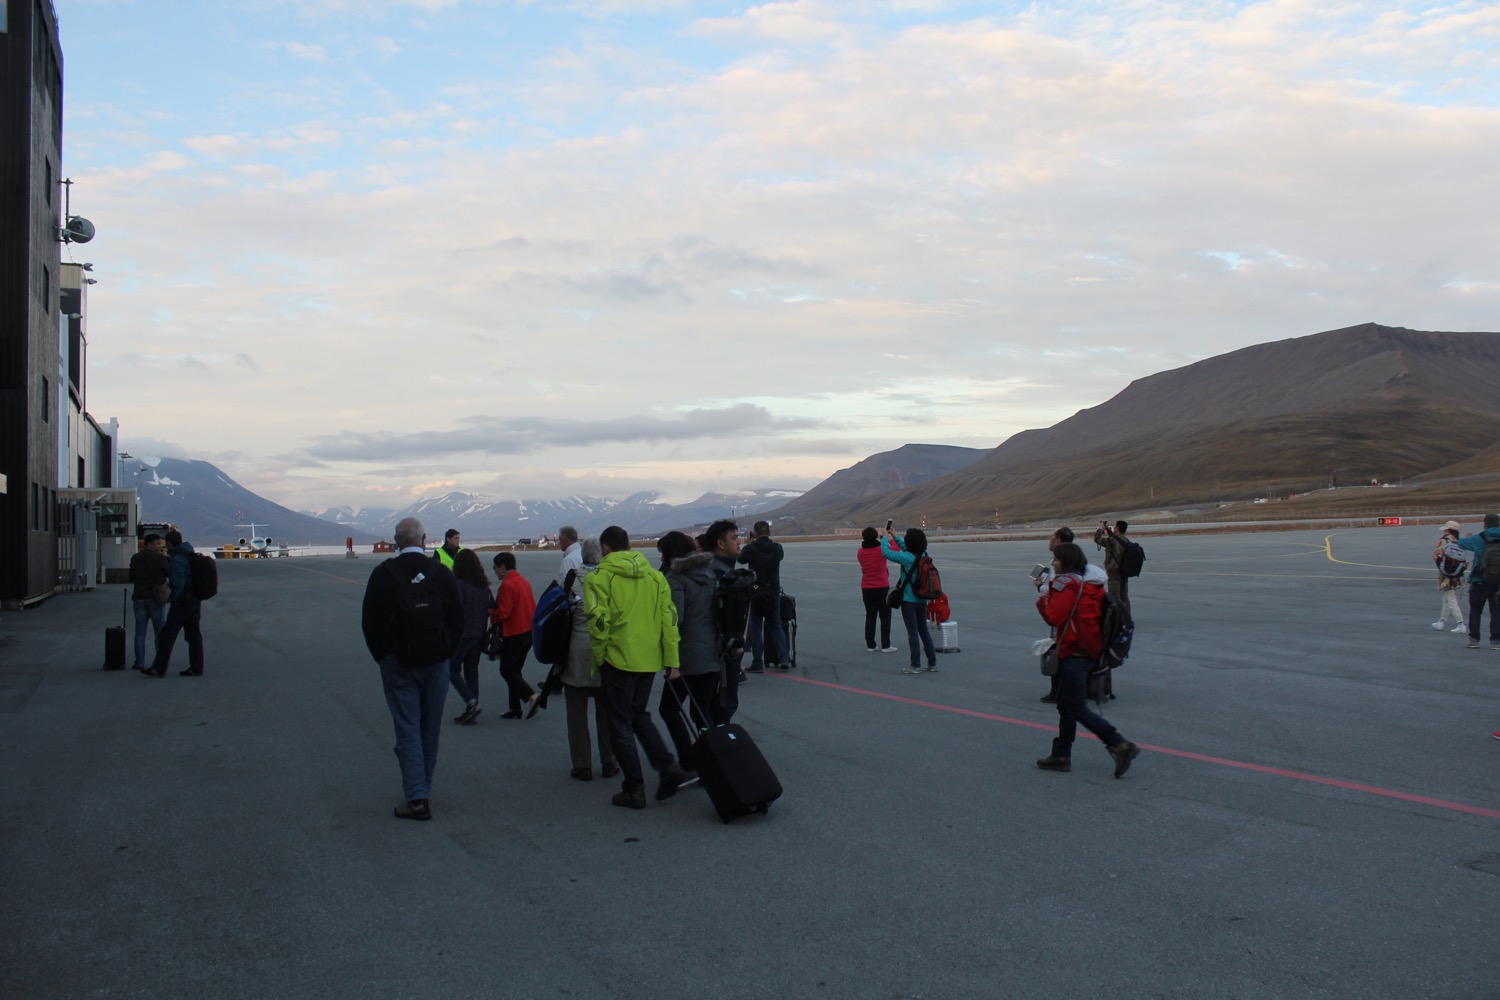 a group of people standing on a tarmac